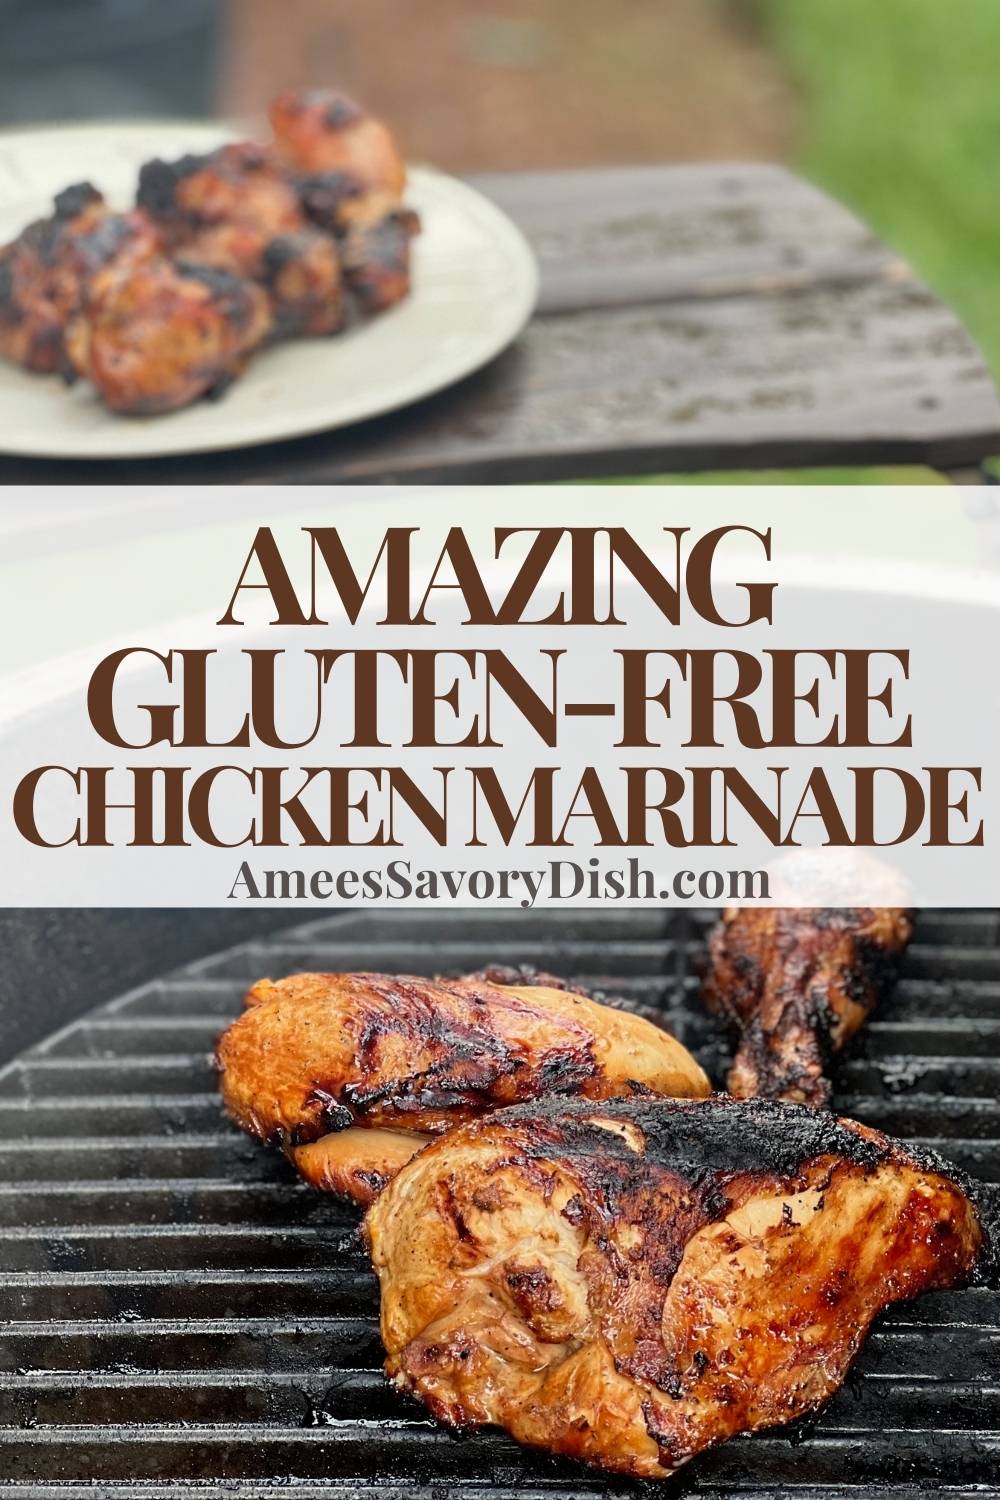 Level up your grilling game with this Gluten-free Chicken Marinade. Marinate any cut of chicken overnight in a flawless balance of savory, citrusy, salty, and spicy flavors. via @Ameessavorydish